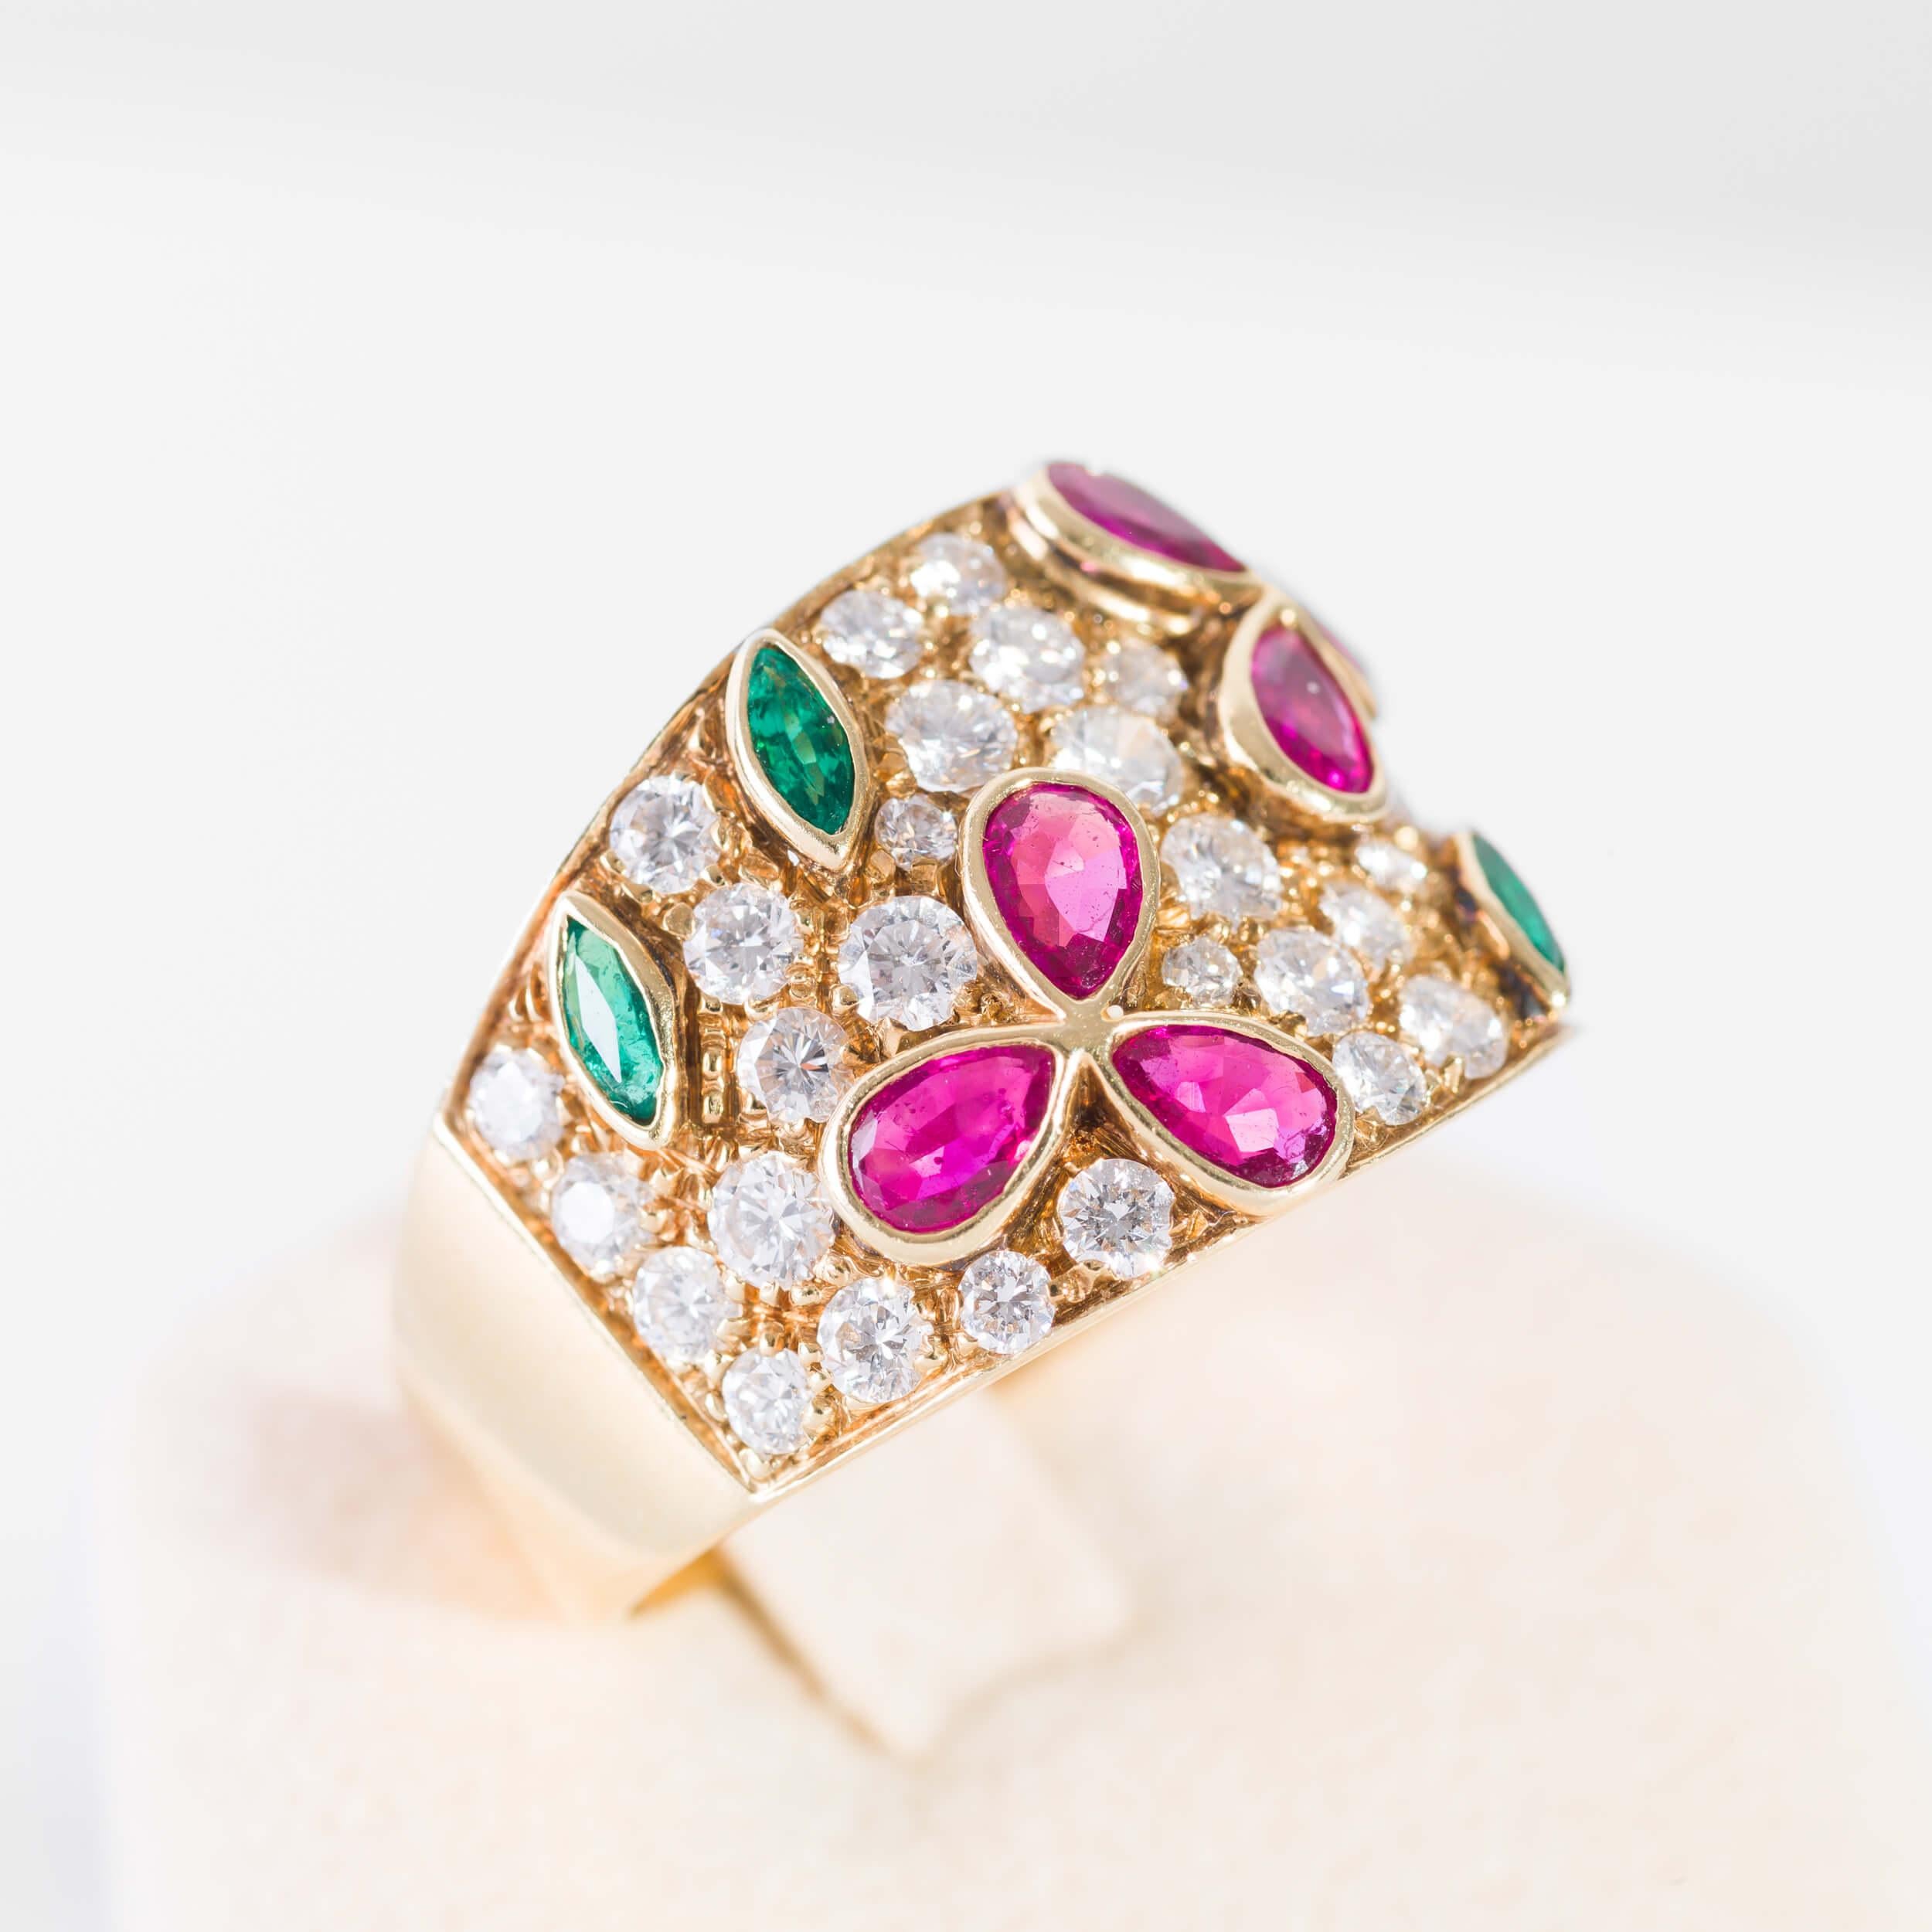 18 kt yellow gold band ring with diamonds and precious stones. Diamonds total 2,15 ct drop cut rubies 0,96 ct and emeralds 0,35 ct 
italian size 19 